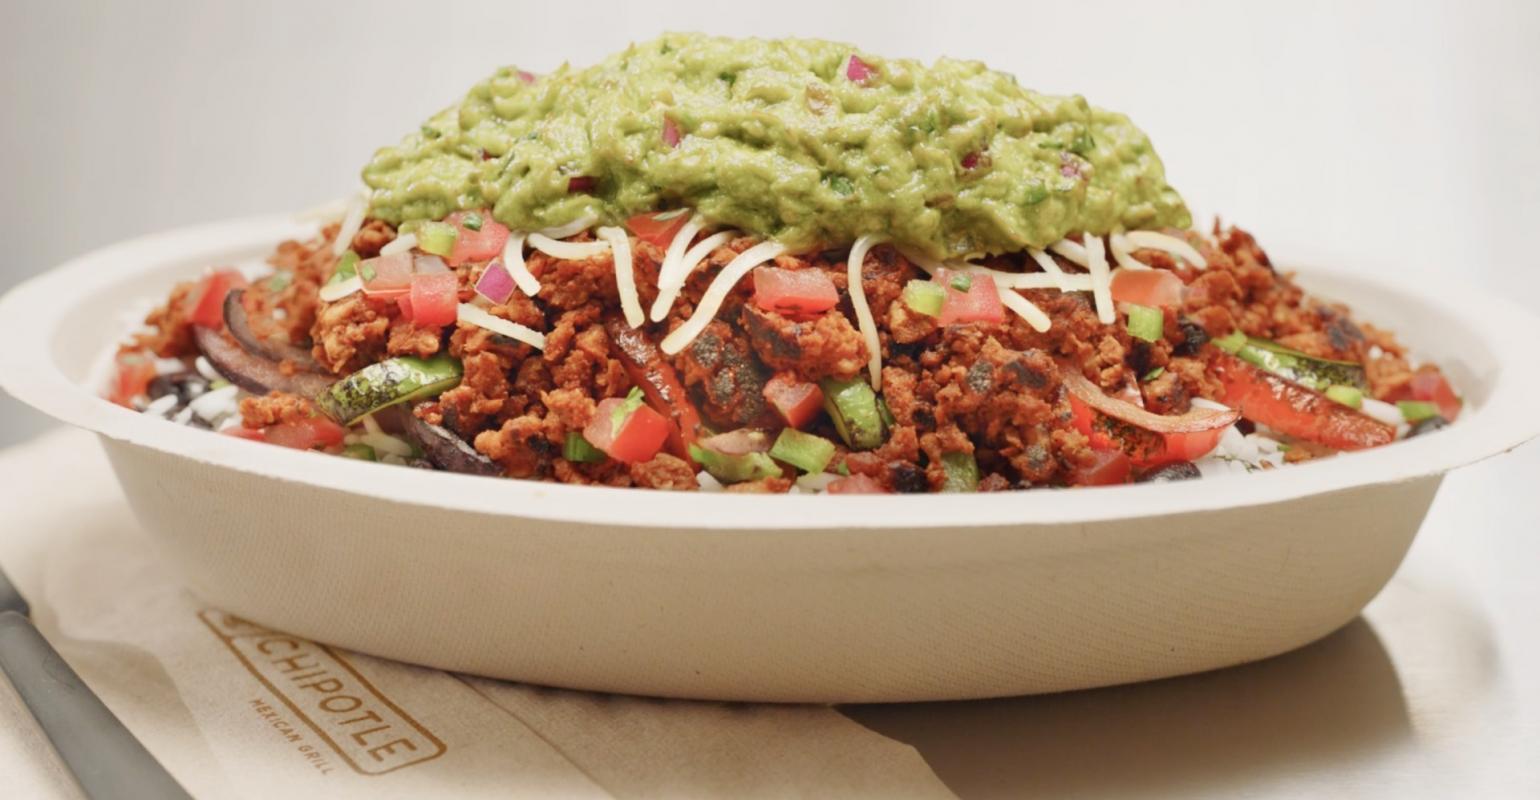 Chipotle increases unit growth target to 7,000 across North